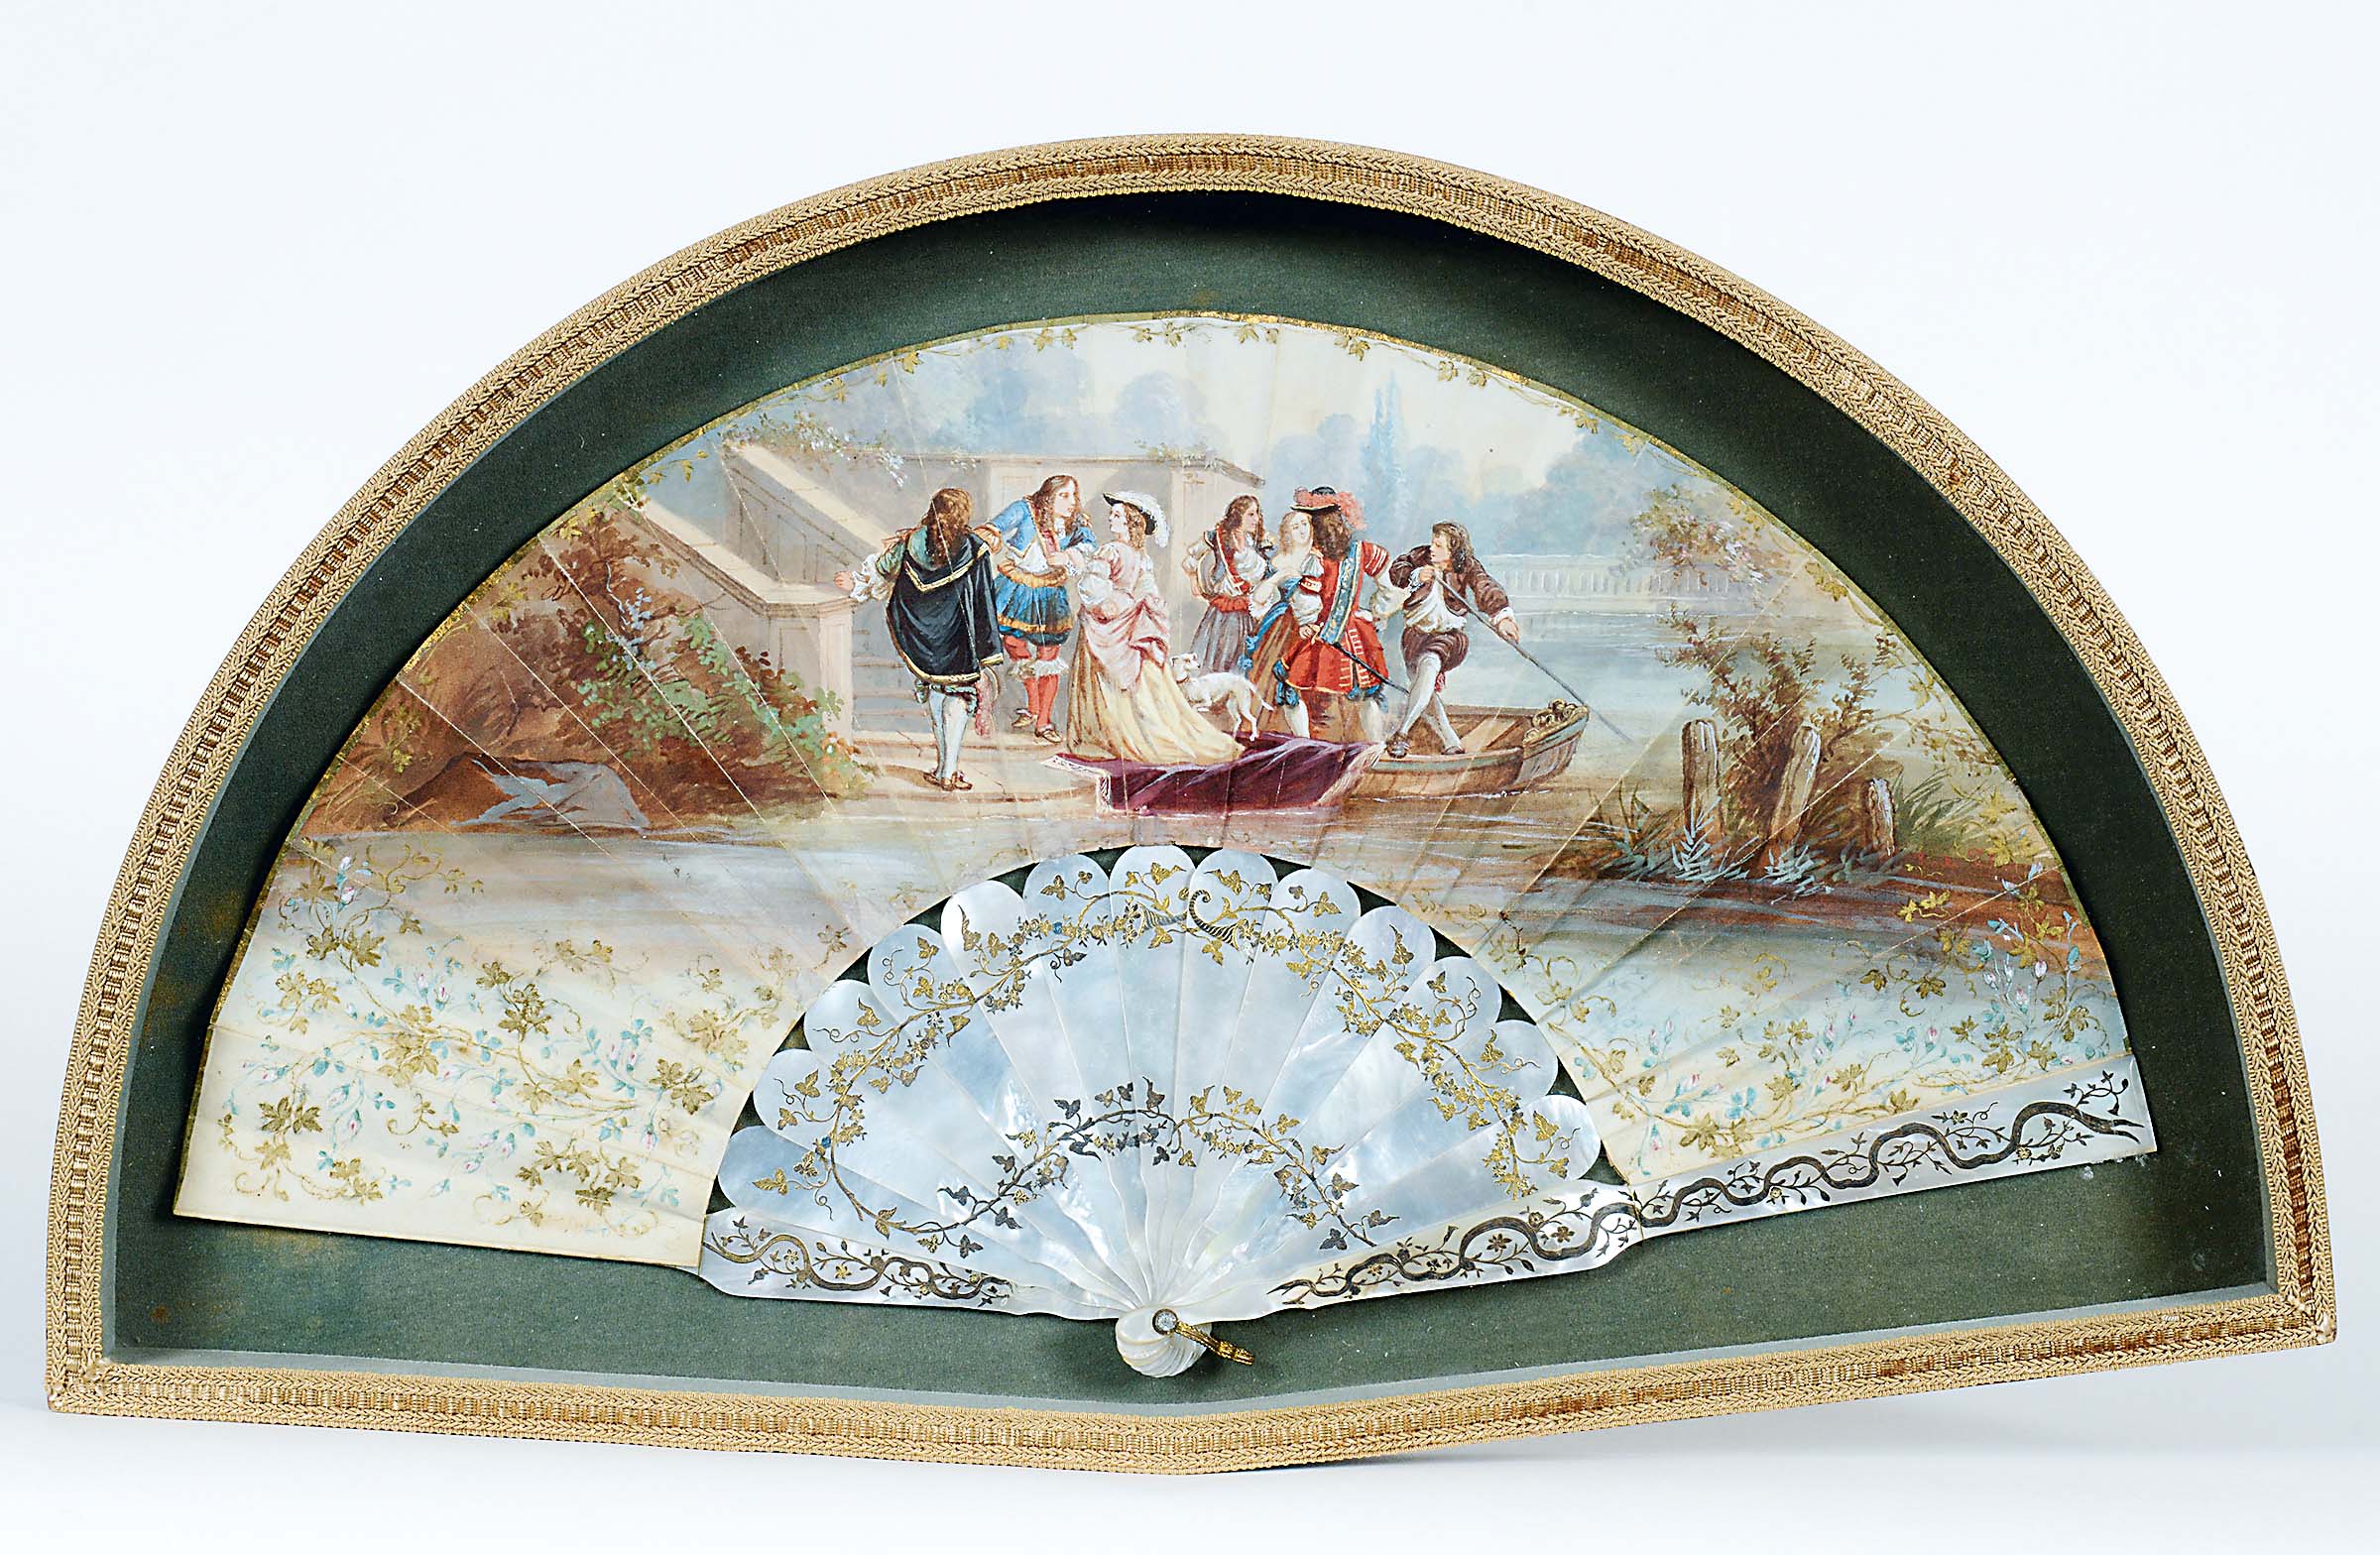 A FRENCH FAN with mother of pearl guards & sticks, engraved and gilt with trailing ivy, the paper